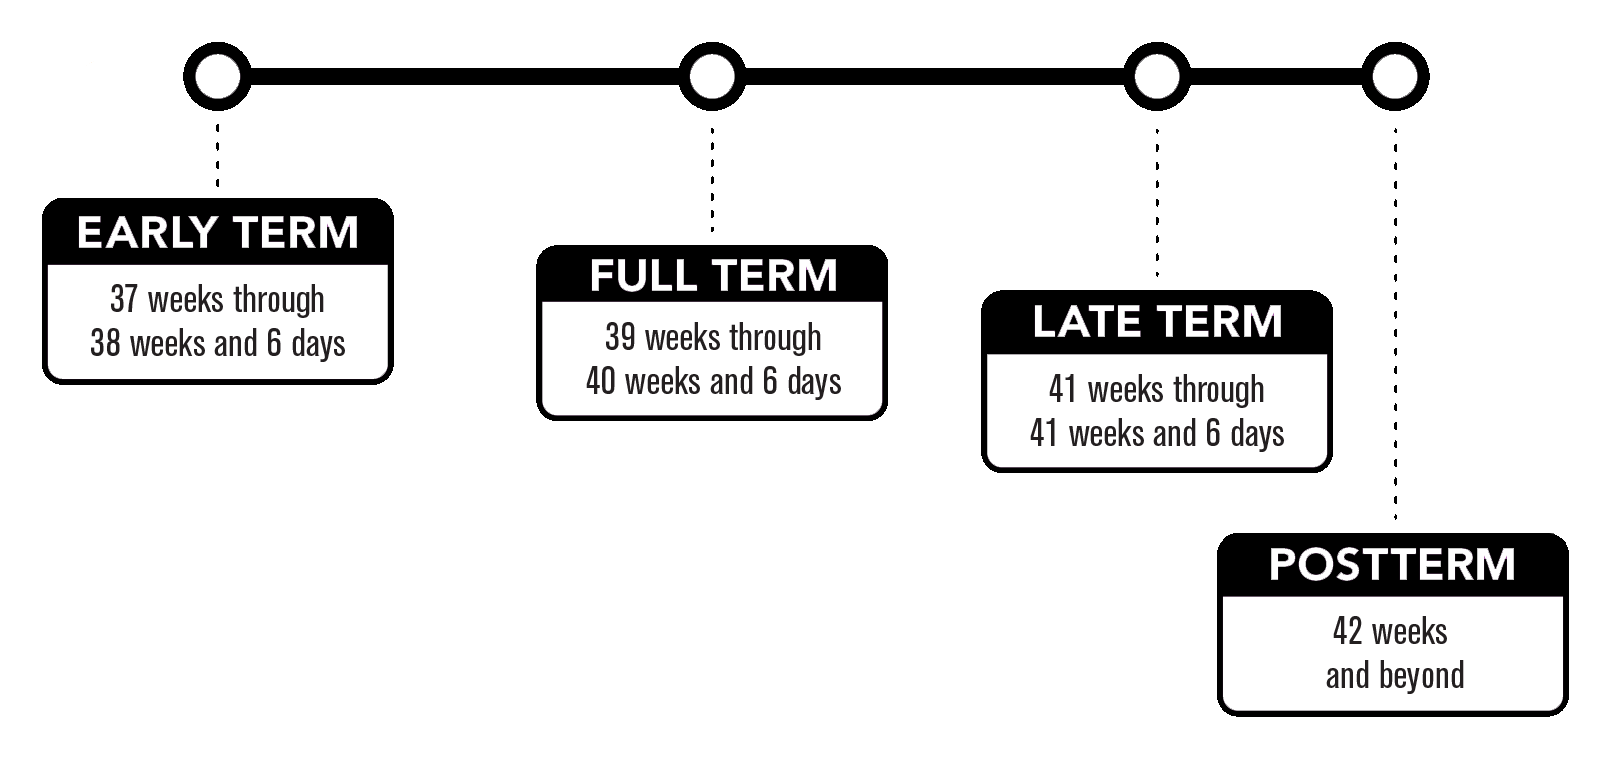 Early term is 37 weeks through 38 weeks and 6 days. Full term is 39 weeks through 40 weeks and 6 days. Late term is 41 weeks through 41 weeks and 6 days. Postterm is 42 weeks and beyond